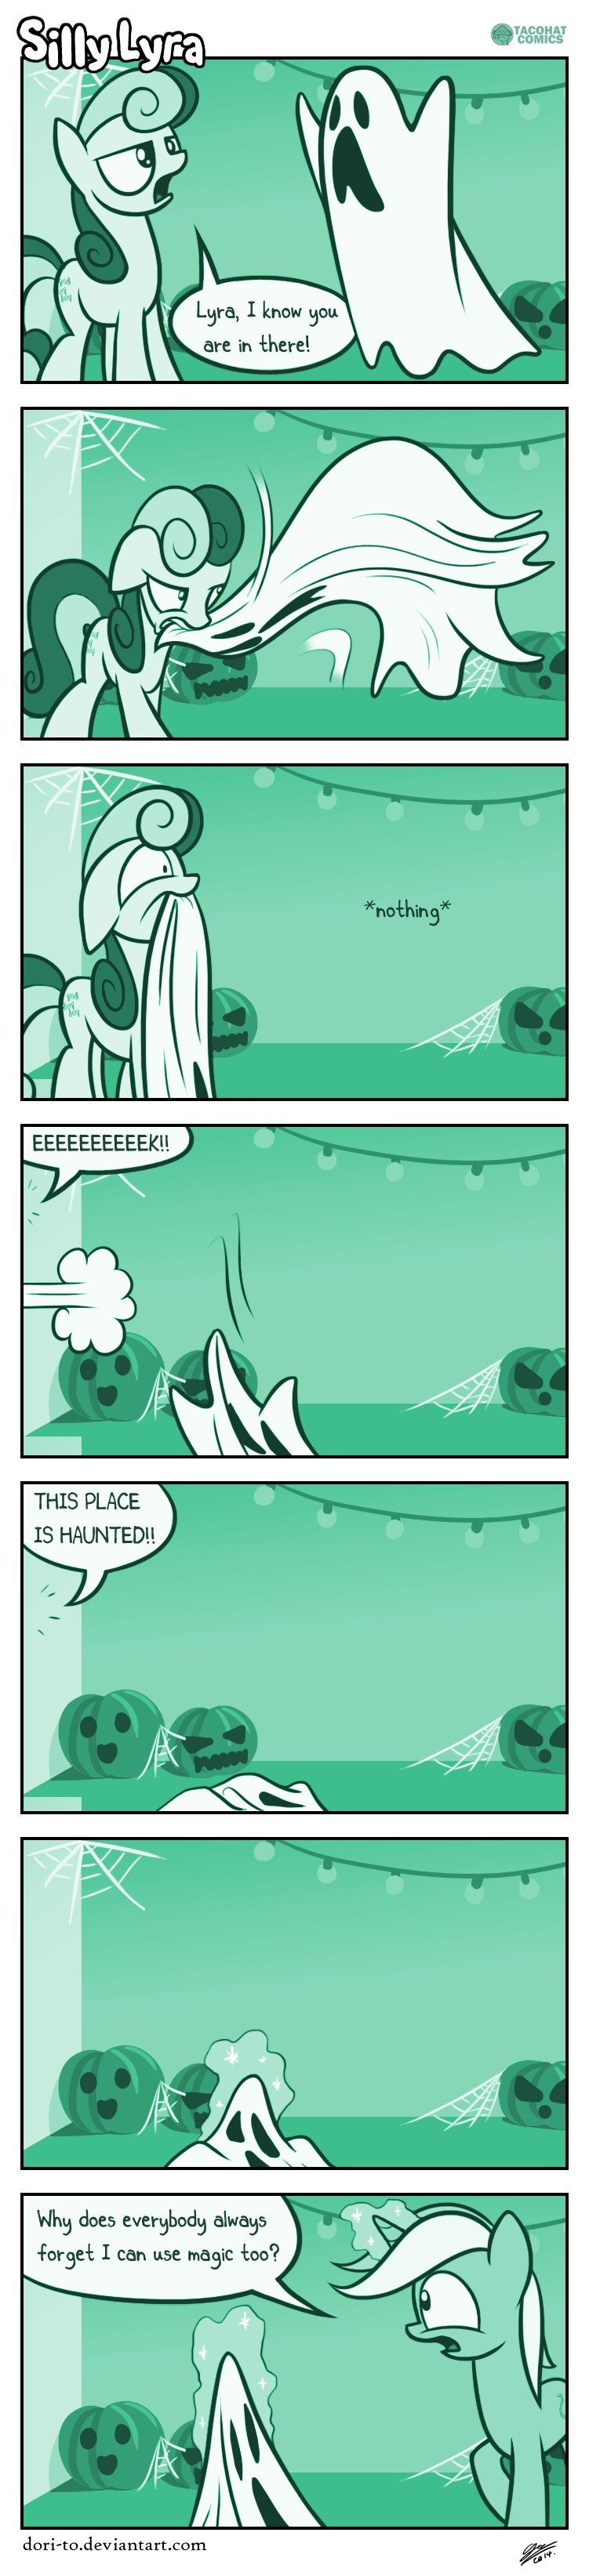 Comic strip #2 - If You Have Ghosts